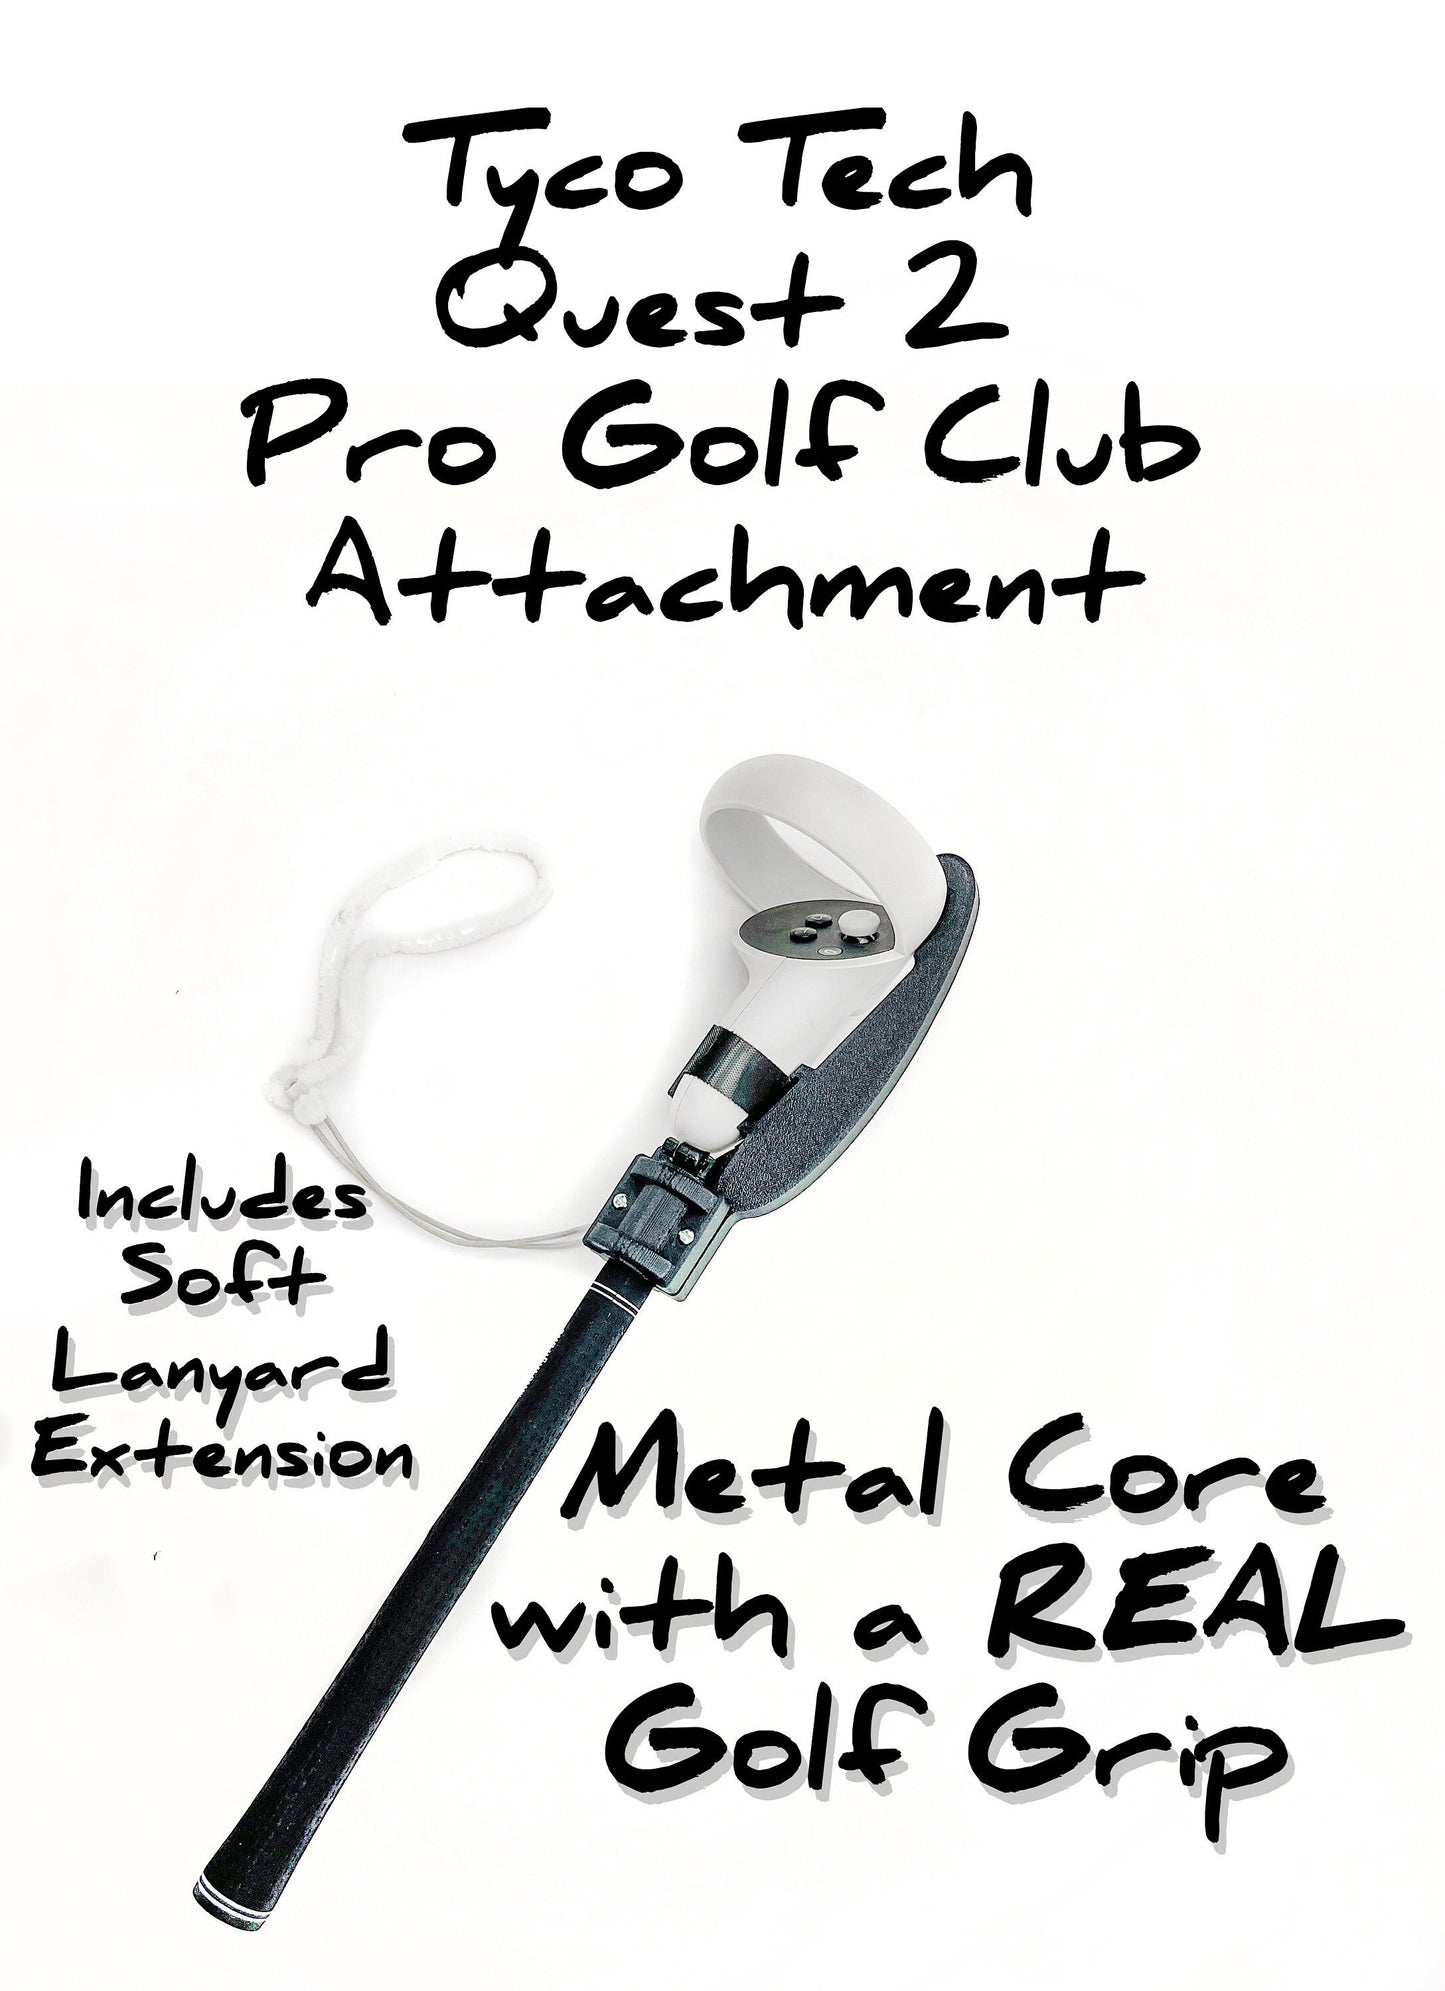 Meta Quest 2 and Quest Pro Golf Club